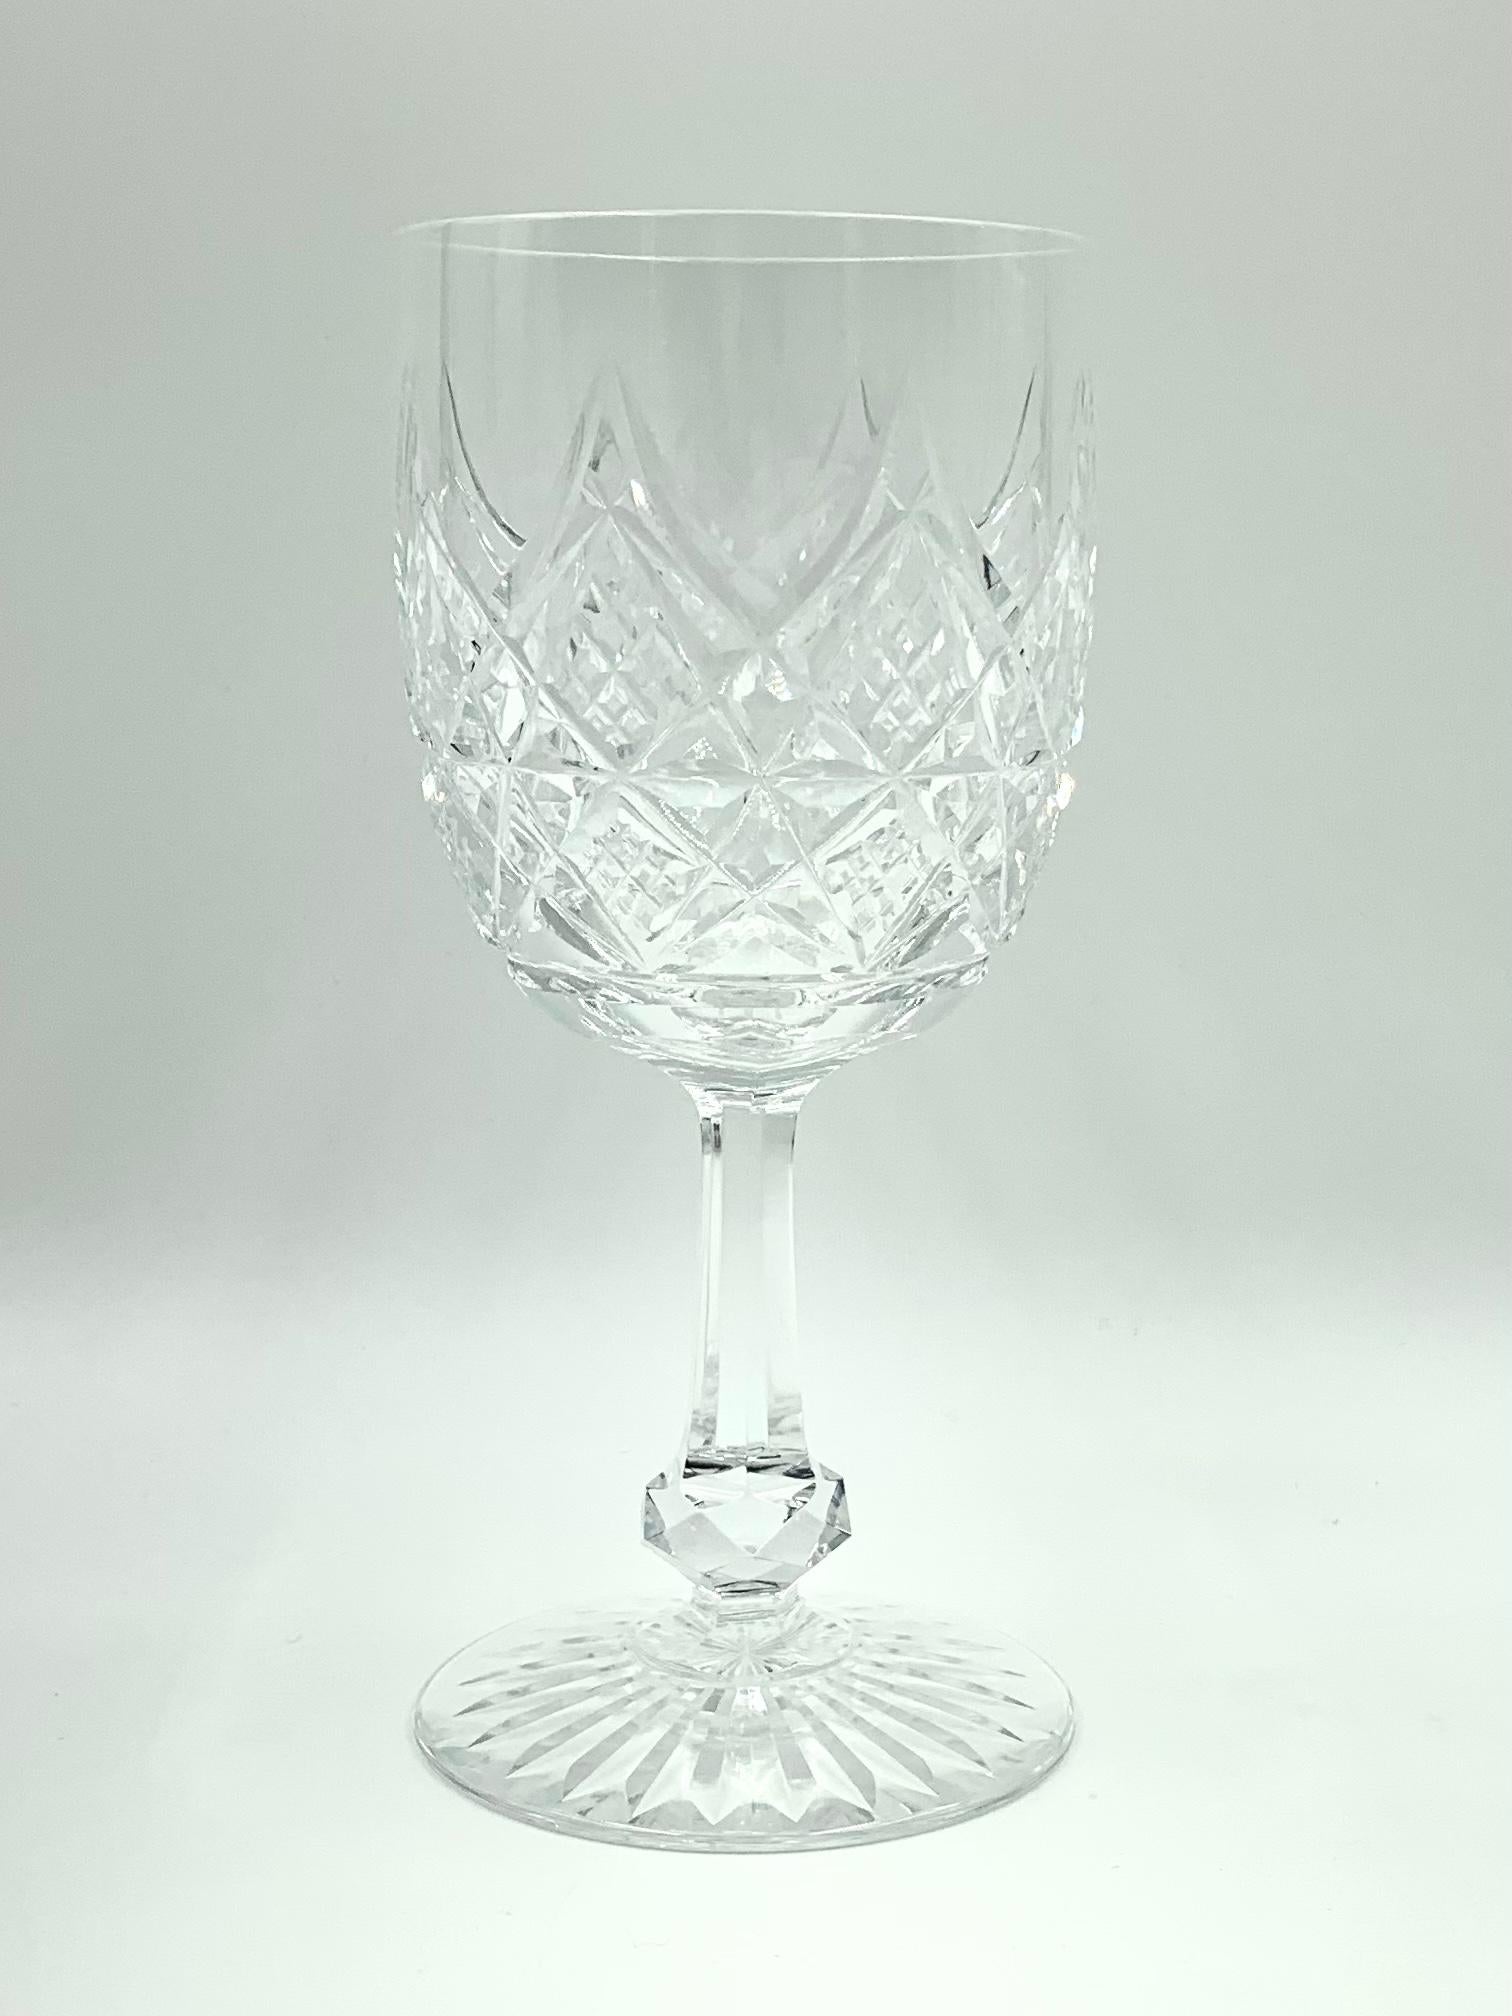 Hand-Crafted Rare Luxurious 24 Piece Baccarat Colbert Stemware Service for Eight For Sale